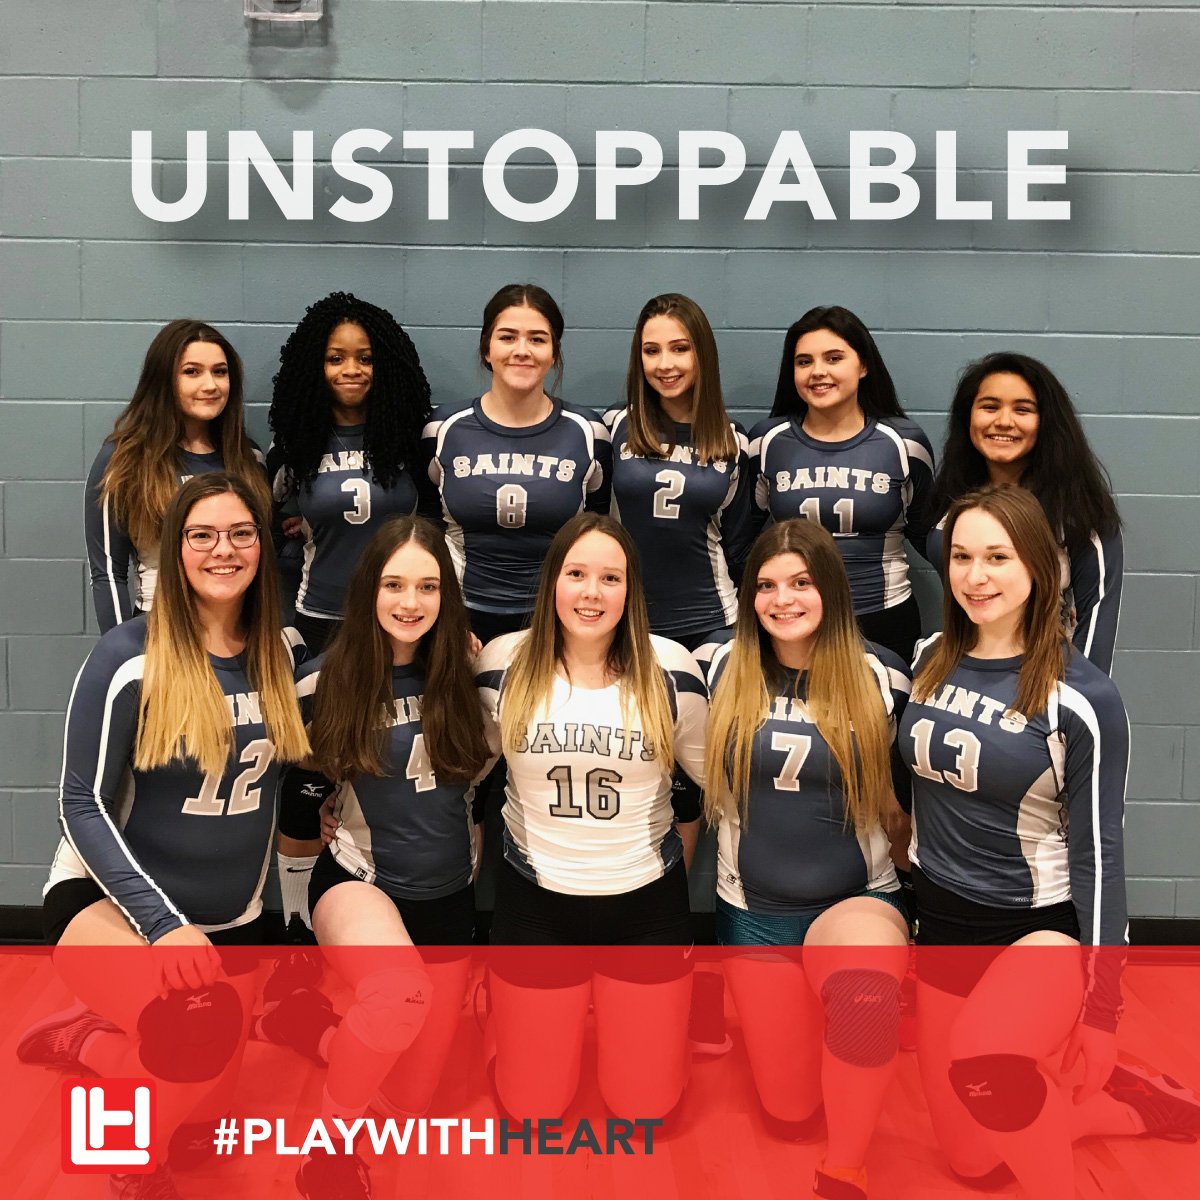 Congratulations to @lw_stjoseph #volleyball #team for taking home the silver at the North Central Zone #Championships. 
#LionheartSports #PlaywithHeart #DesignedinCanada
#unstoppable #ecolestjosephschool #discipline #focus #dedication #girlpower #atheltes #sports